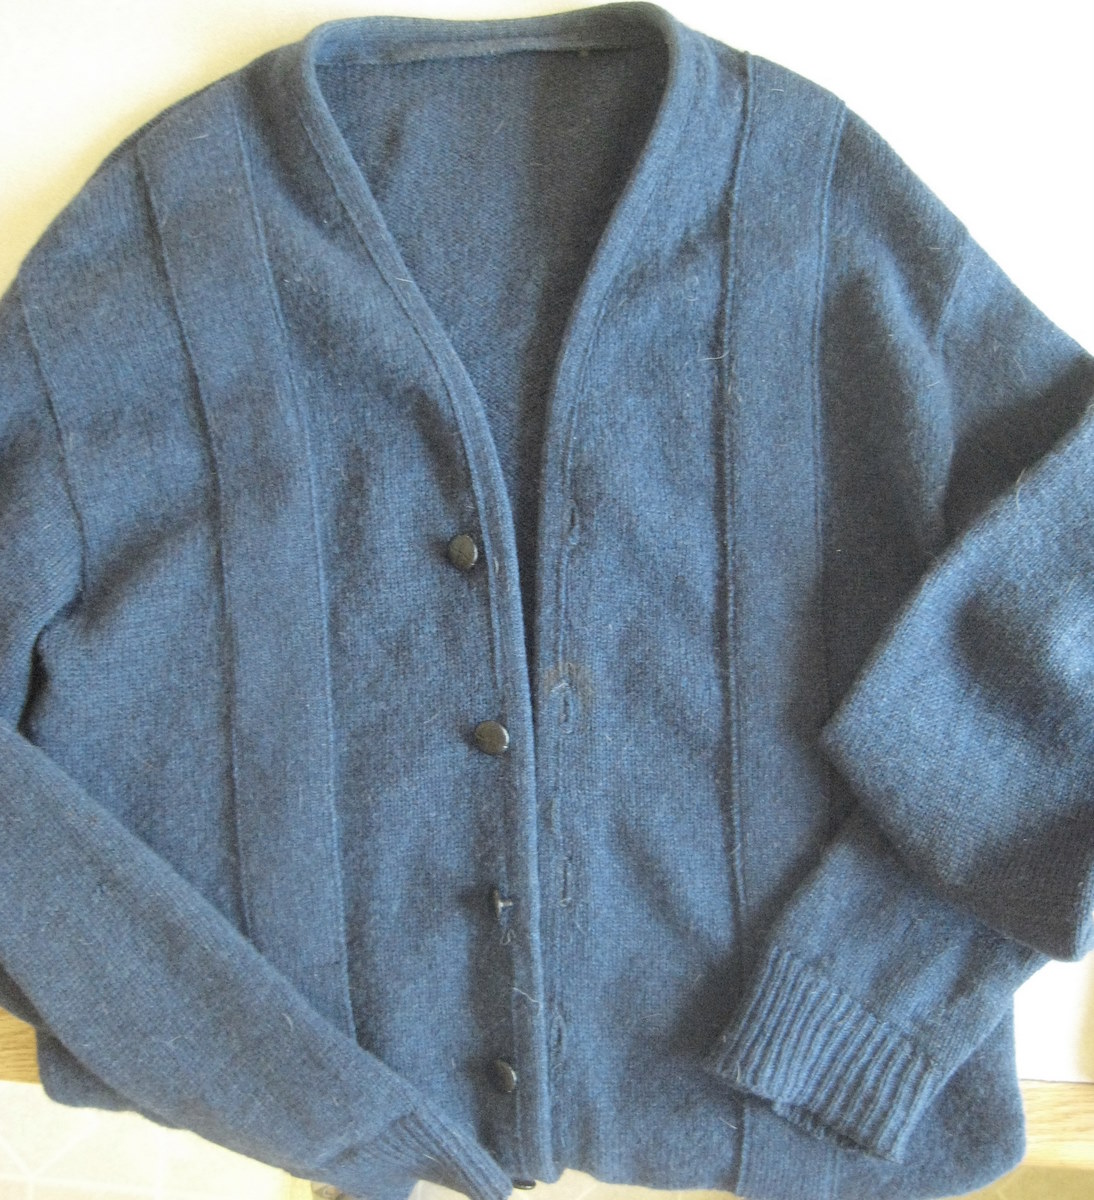 Home Made Originals: Sweater Surgery 101--New Project